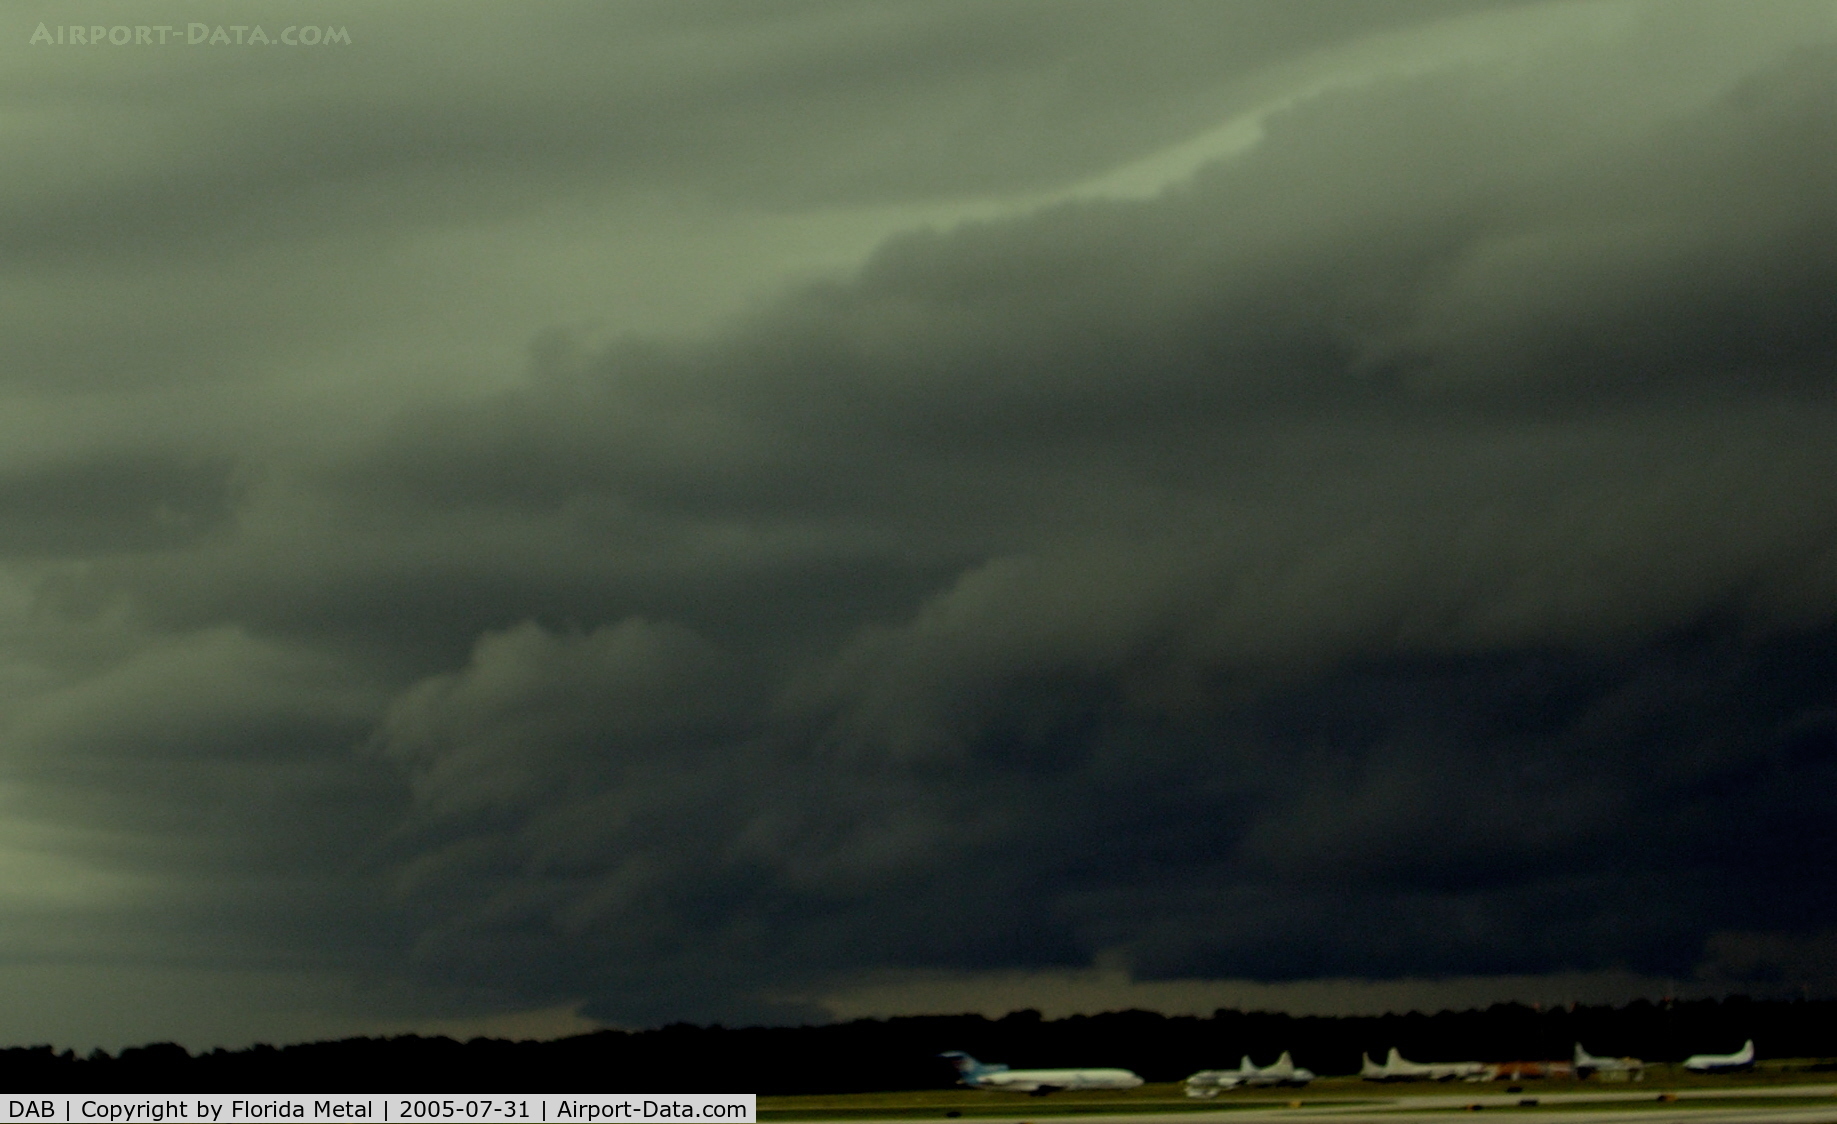 Daytona Beach International Airport (DAB) - Looking Southwest over the airfield at a nasty summer storm